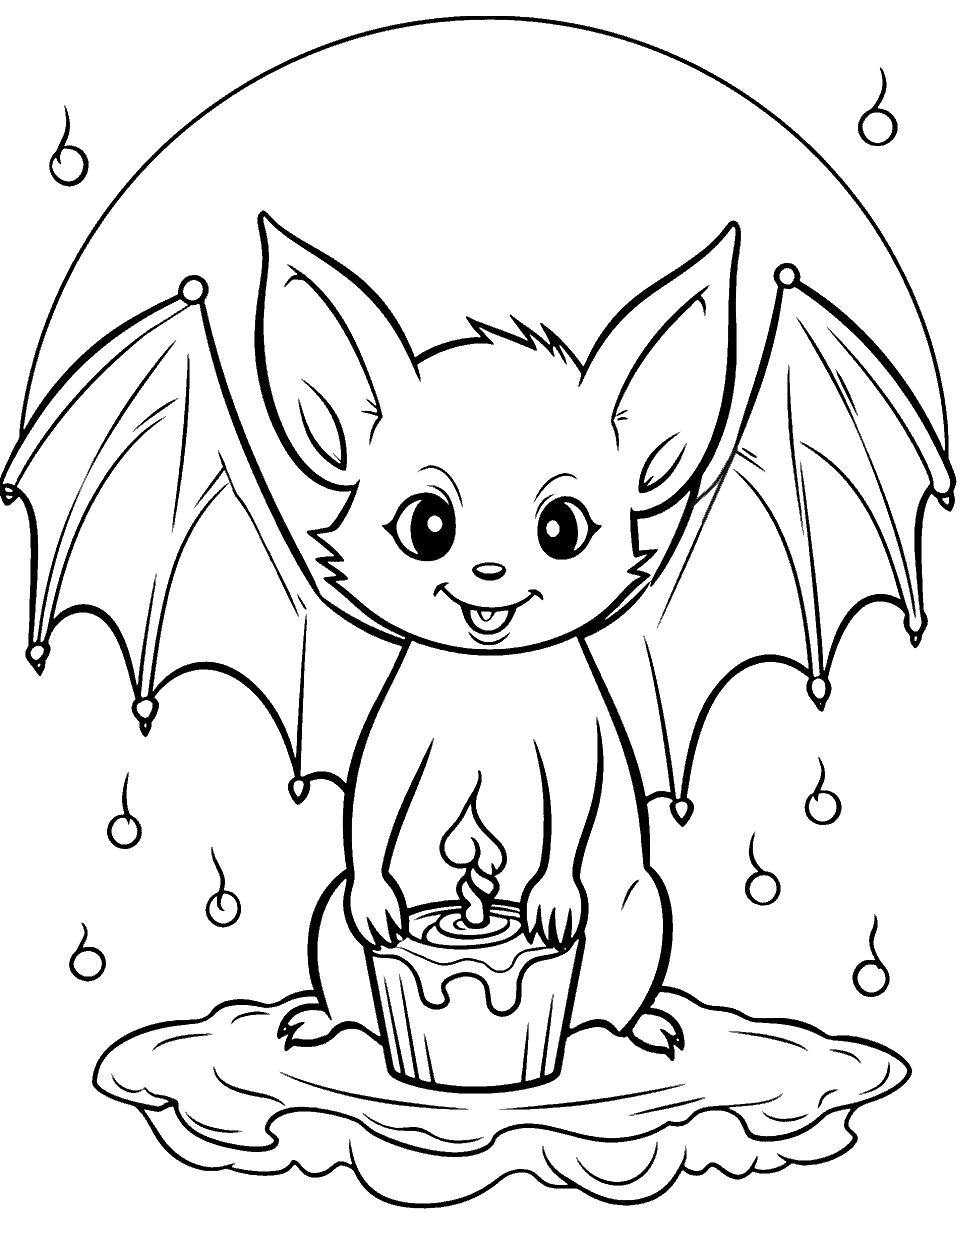 Bat with a Birthday Cake Coloring Page - A bat celebrating with a birthday cake.